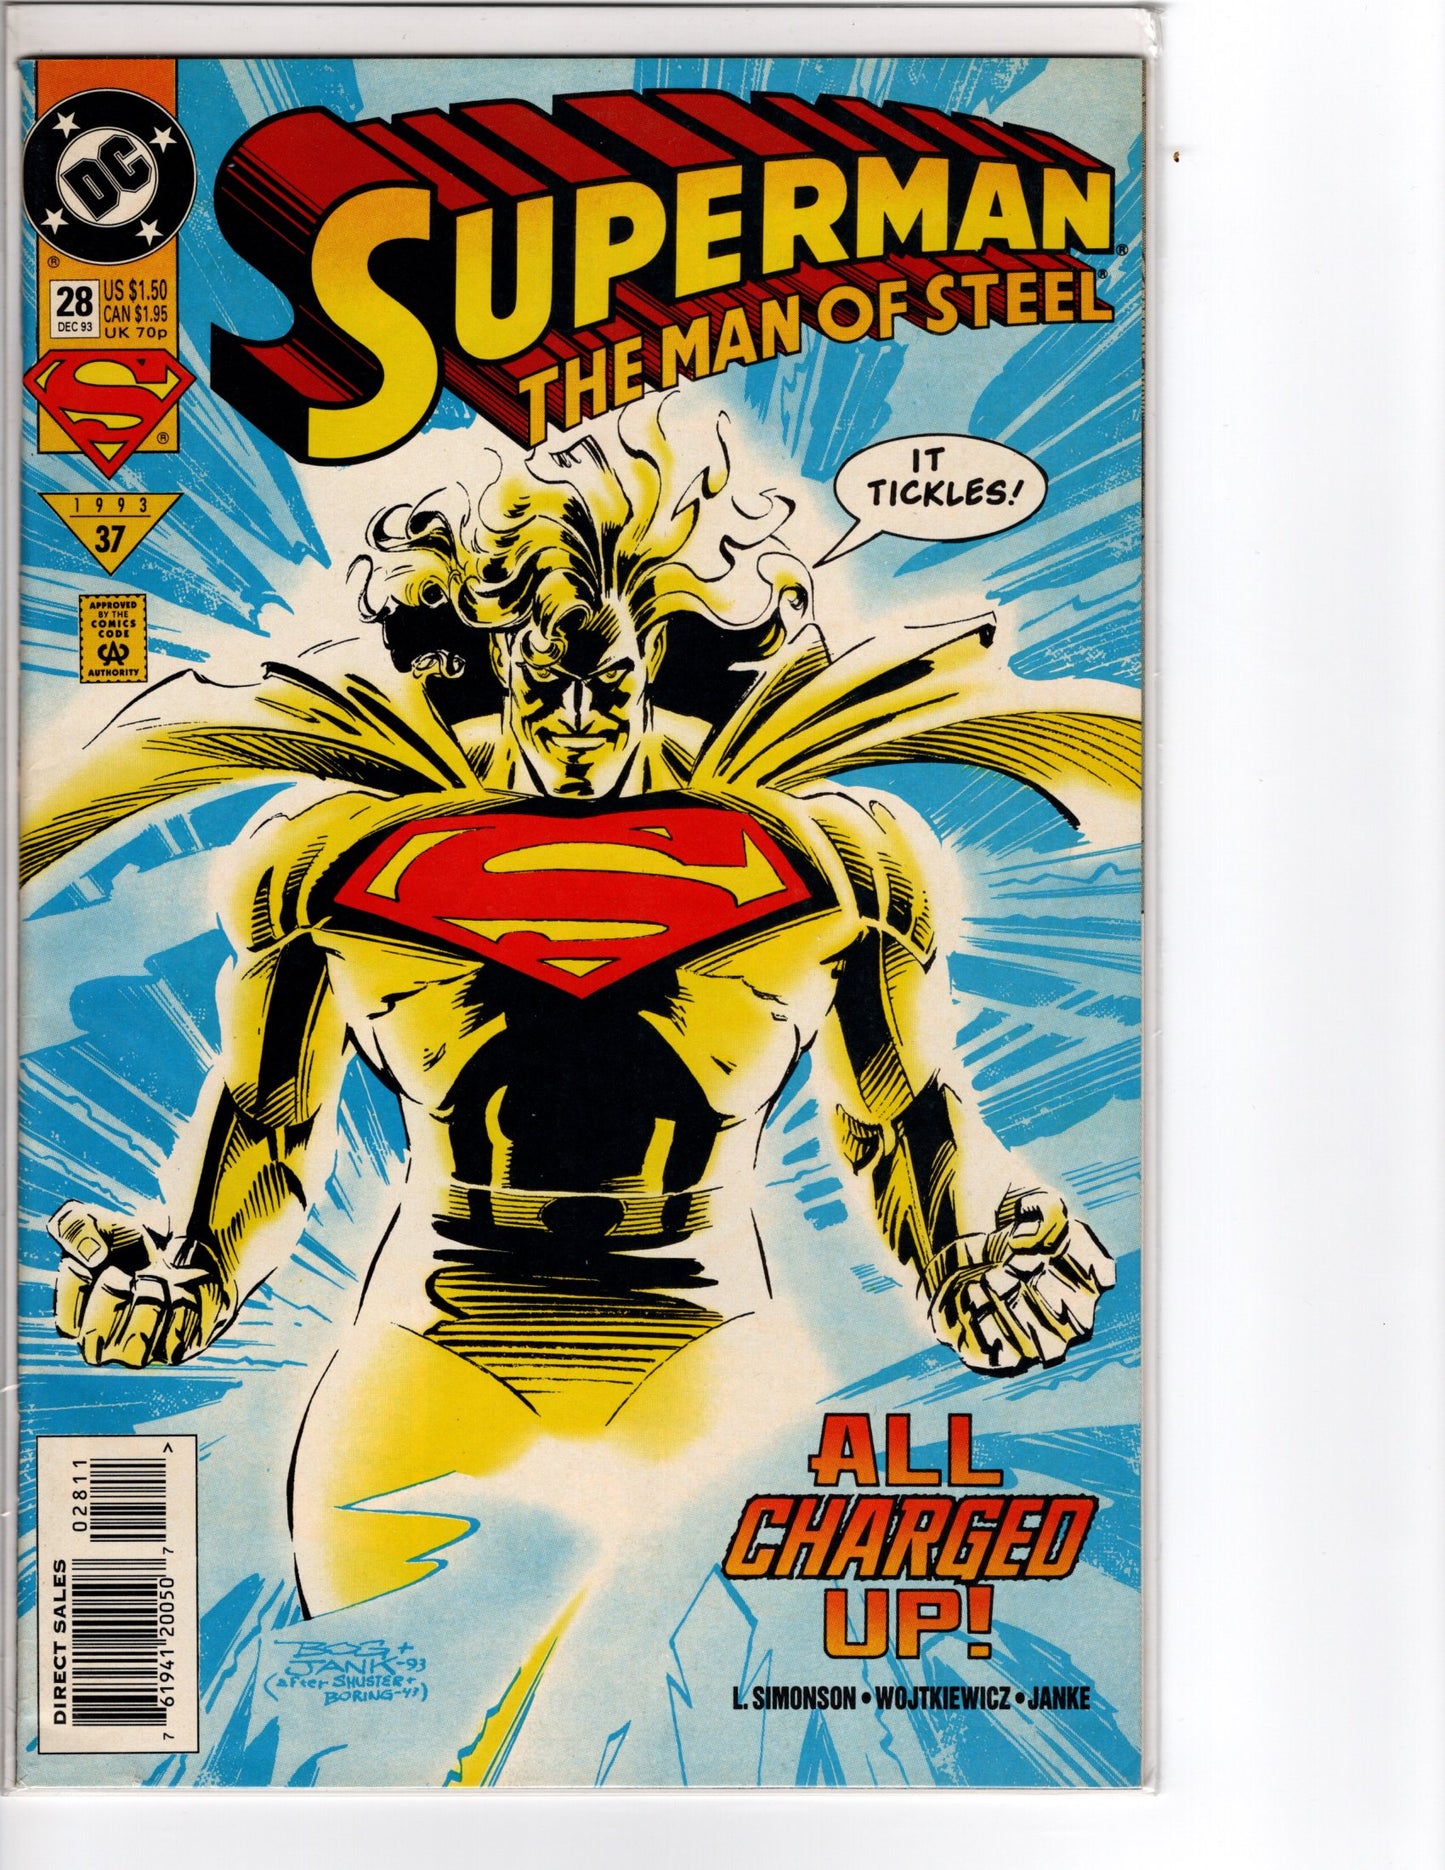 Superman - The Man of Steel No. 28